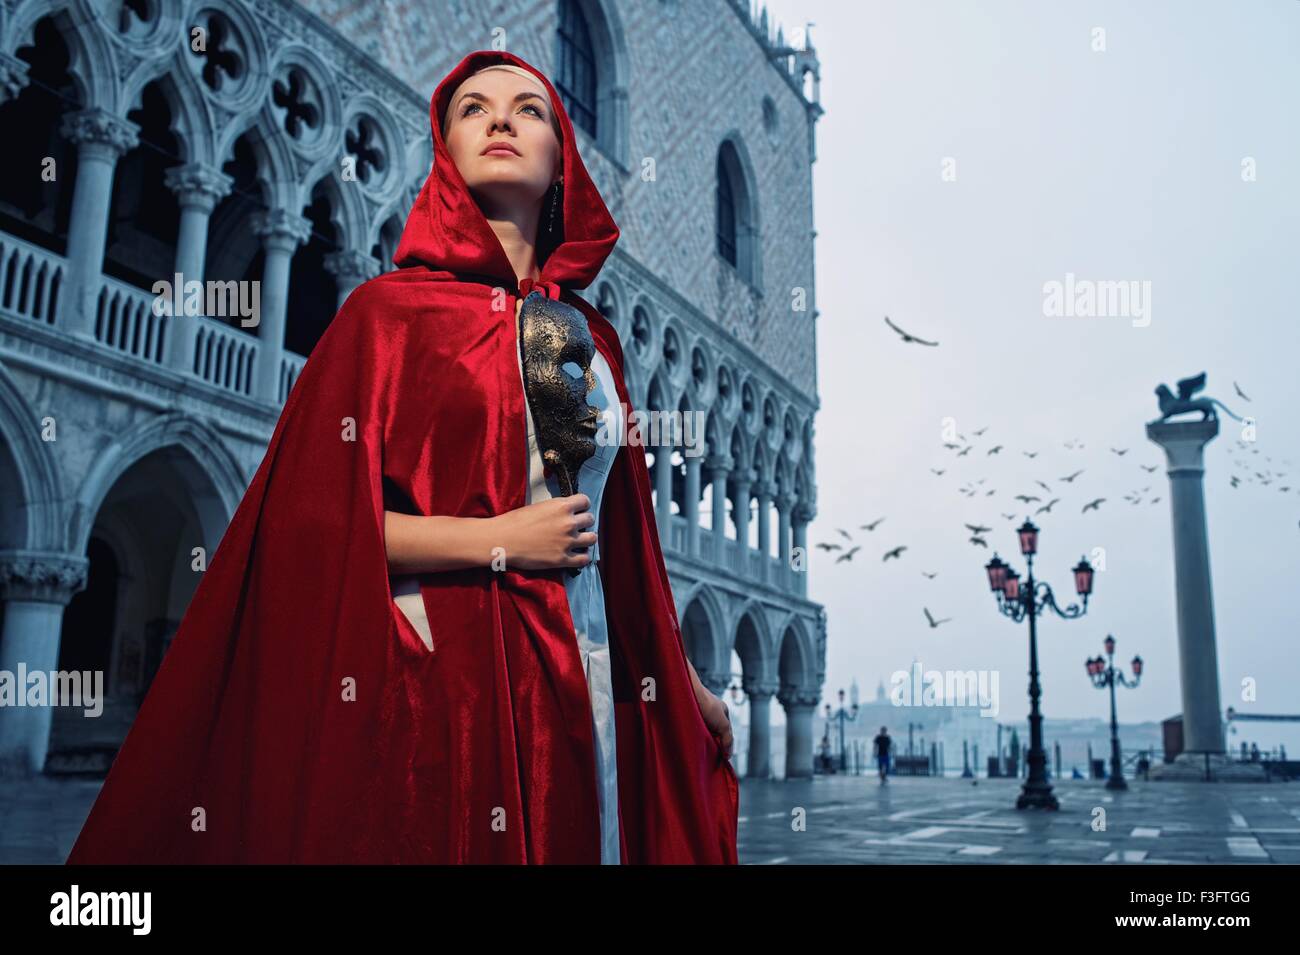 Beautiful woman in red cloak against Dodge's Palace Stock Photo